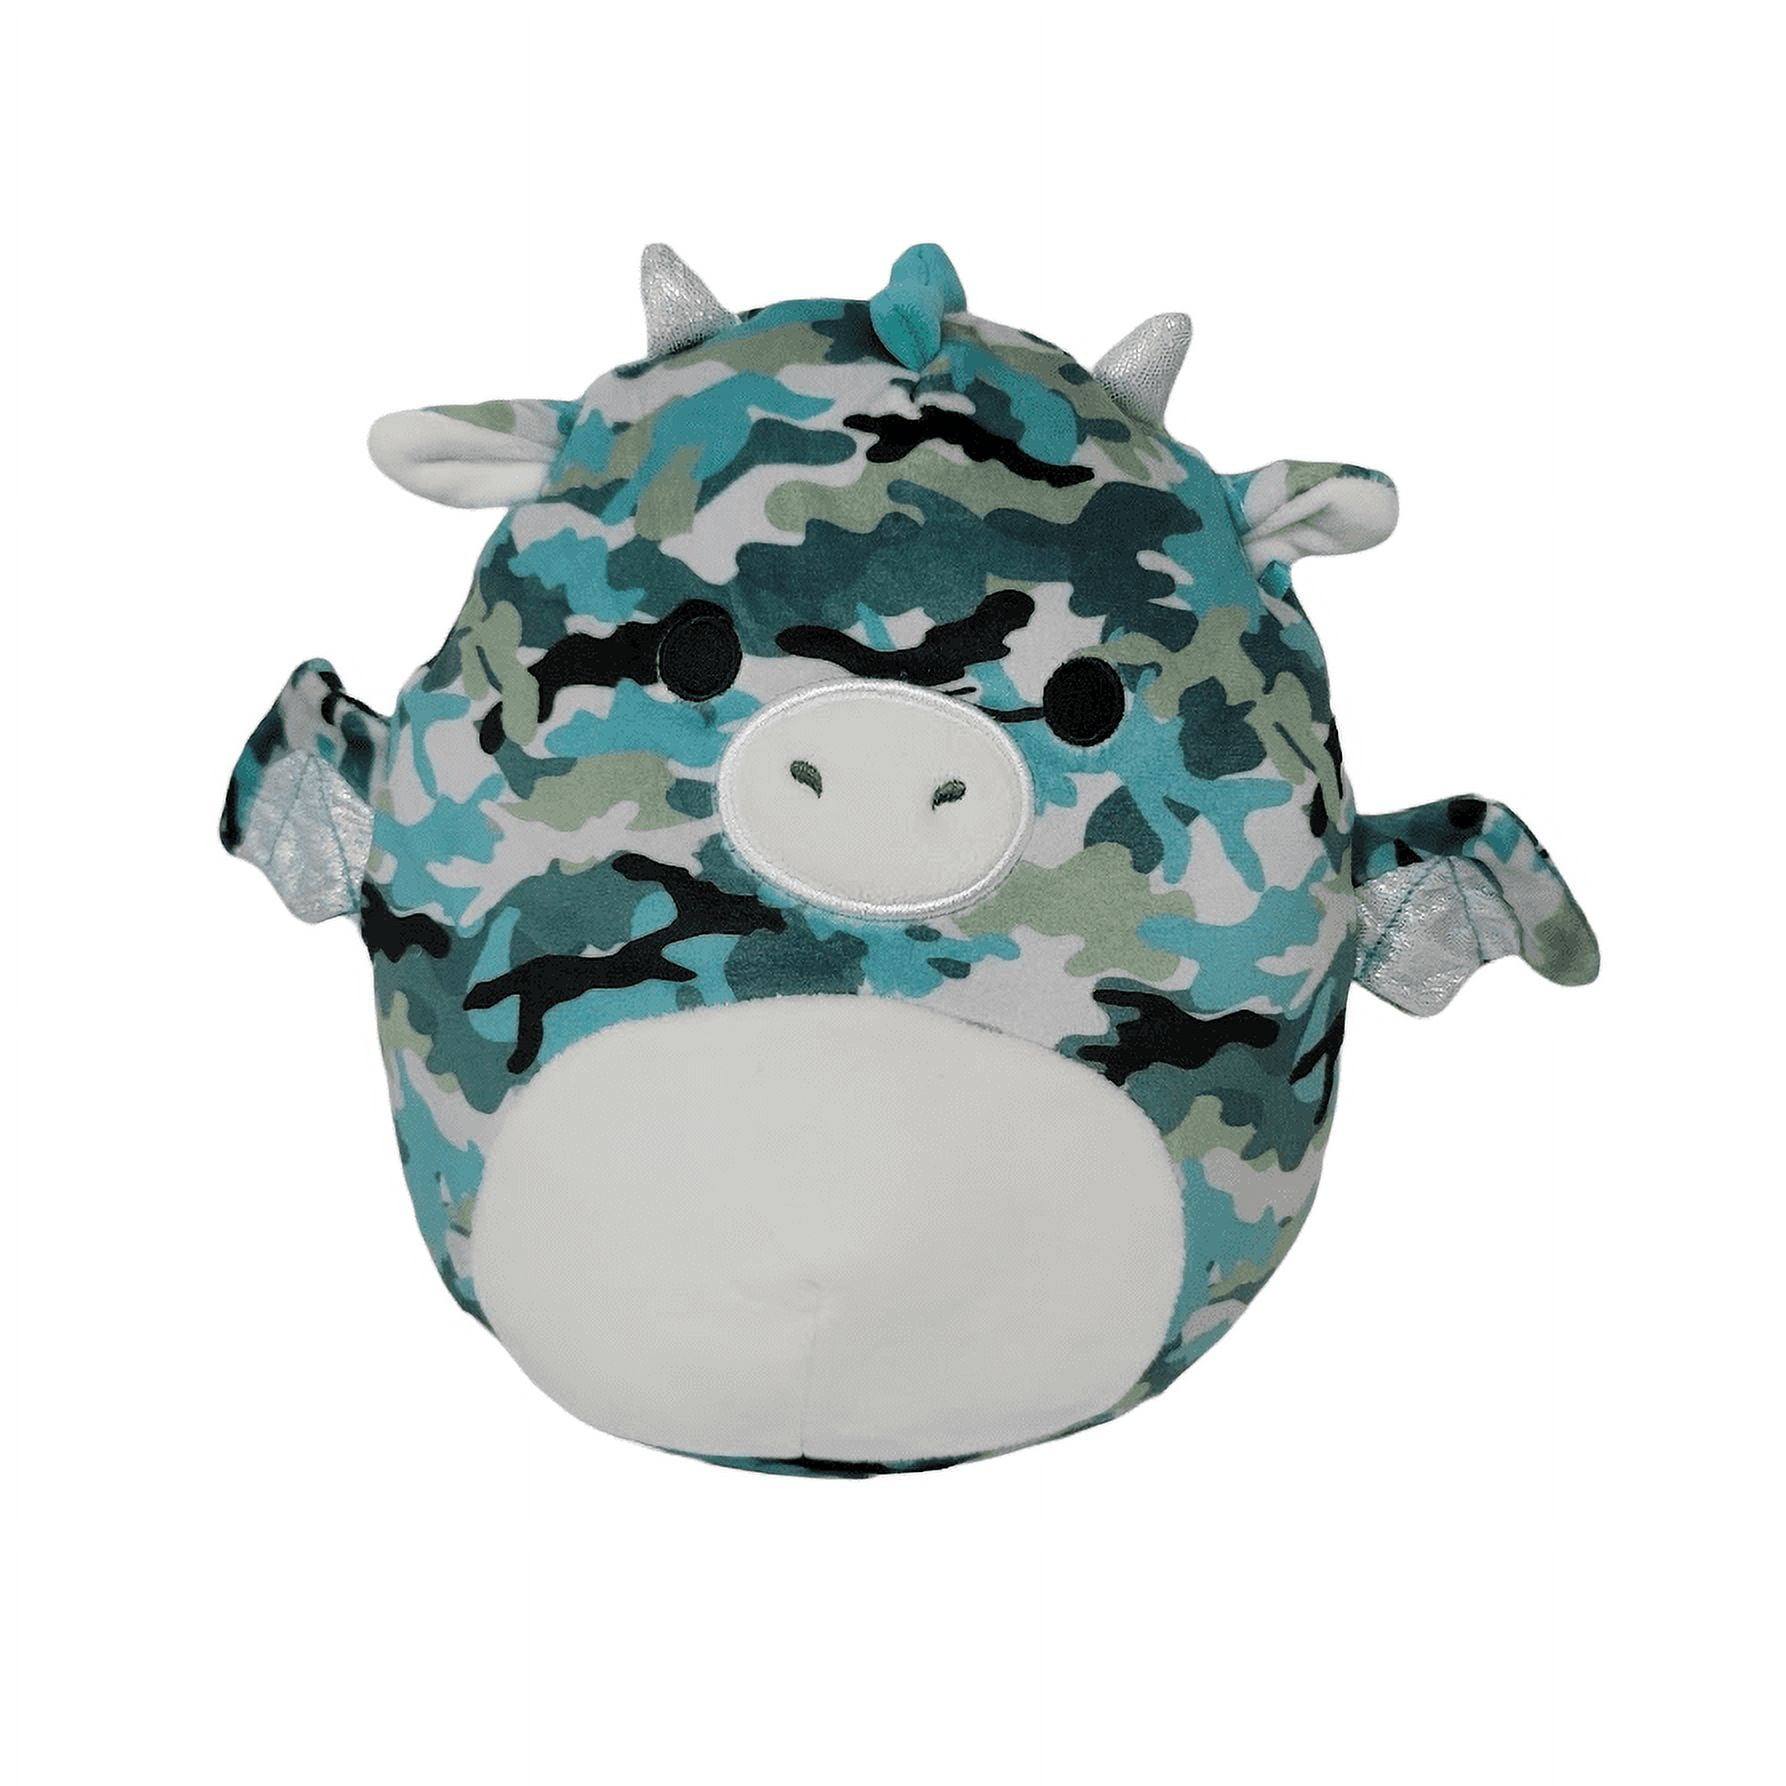 Squishmallows Official Kellytoys Plush 8 Inch Dalton the Green and Blue  Dragon Ultimate Soft Plush Stuffed Toy 